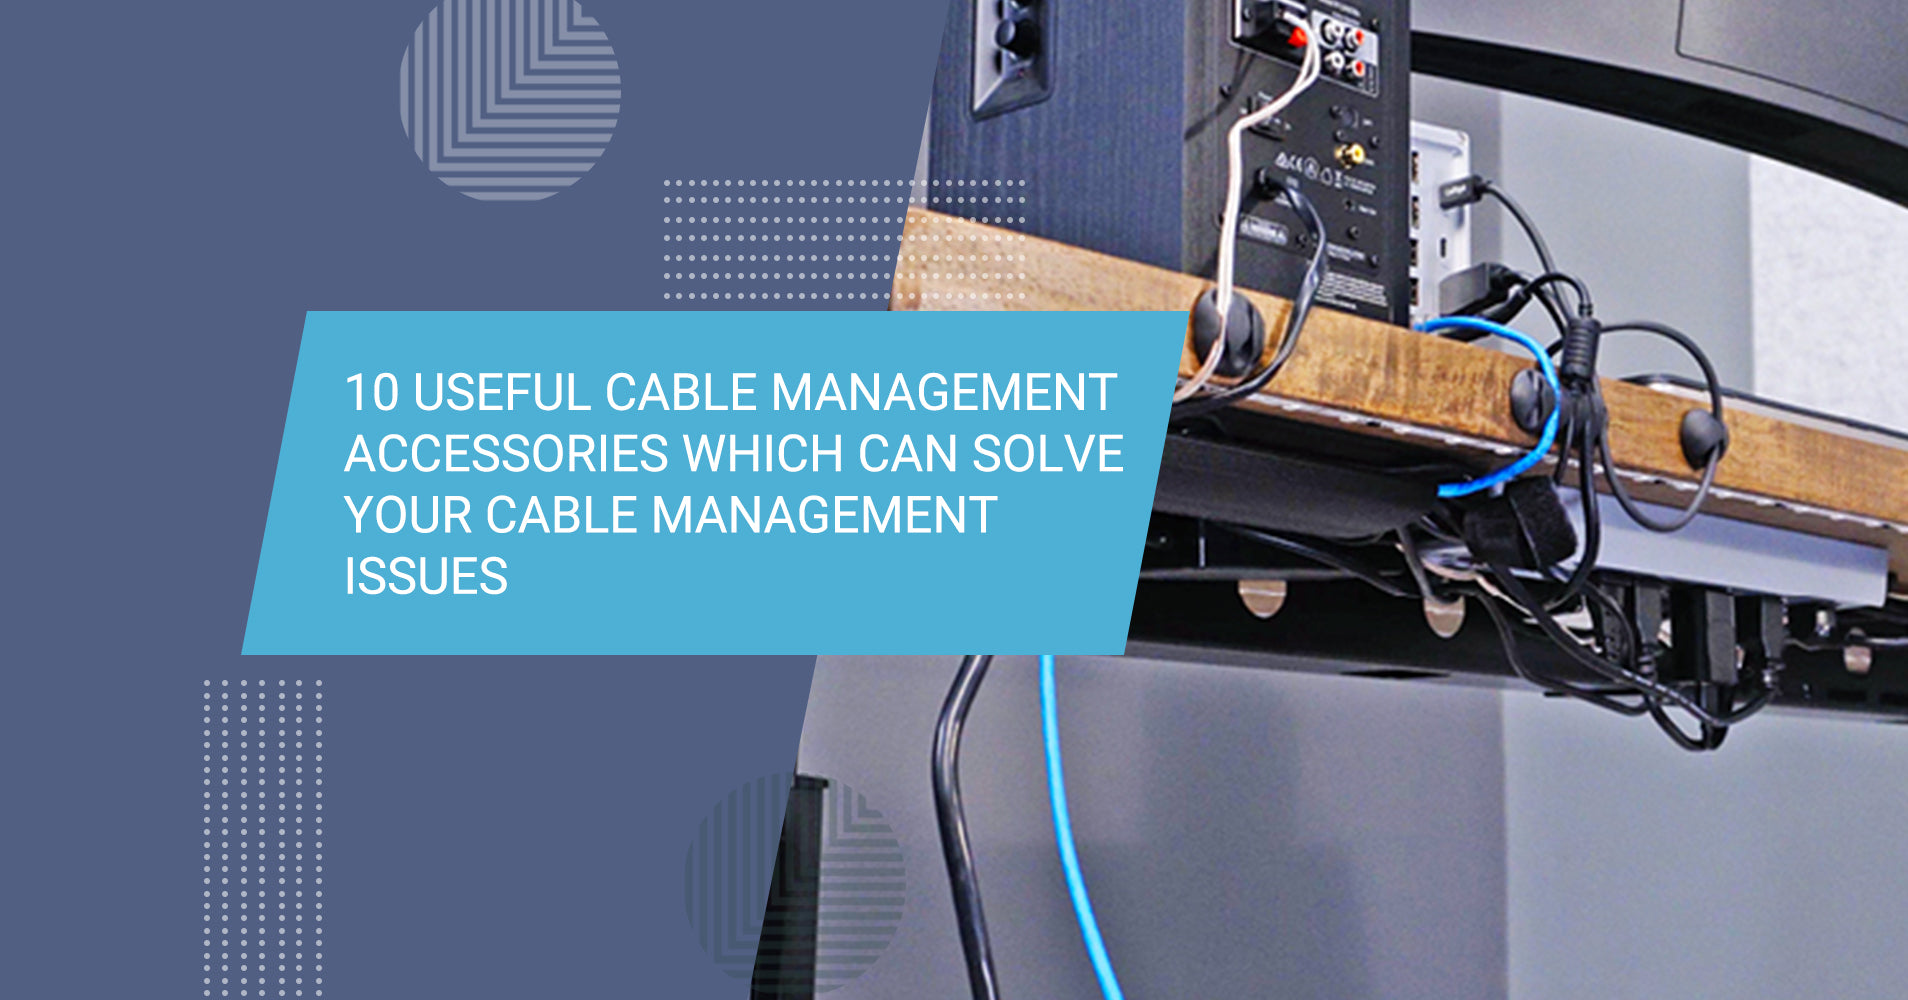 10 Useful Cable Management Accessories which can solve your cable management issues